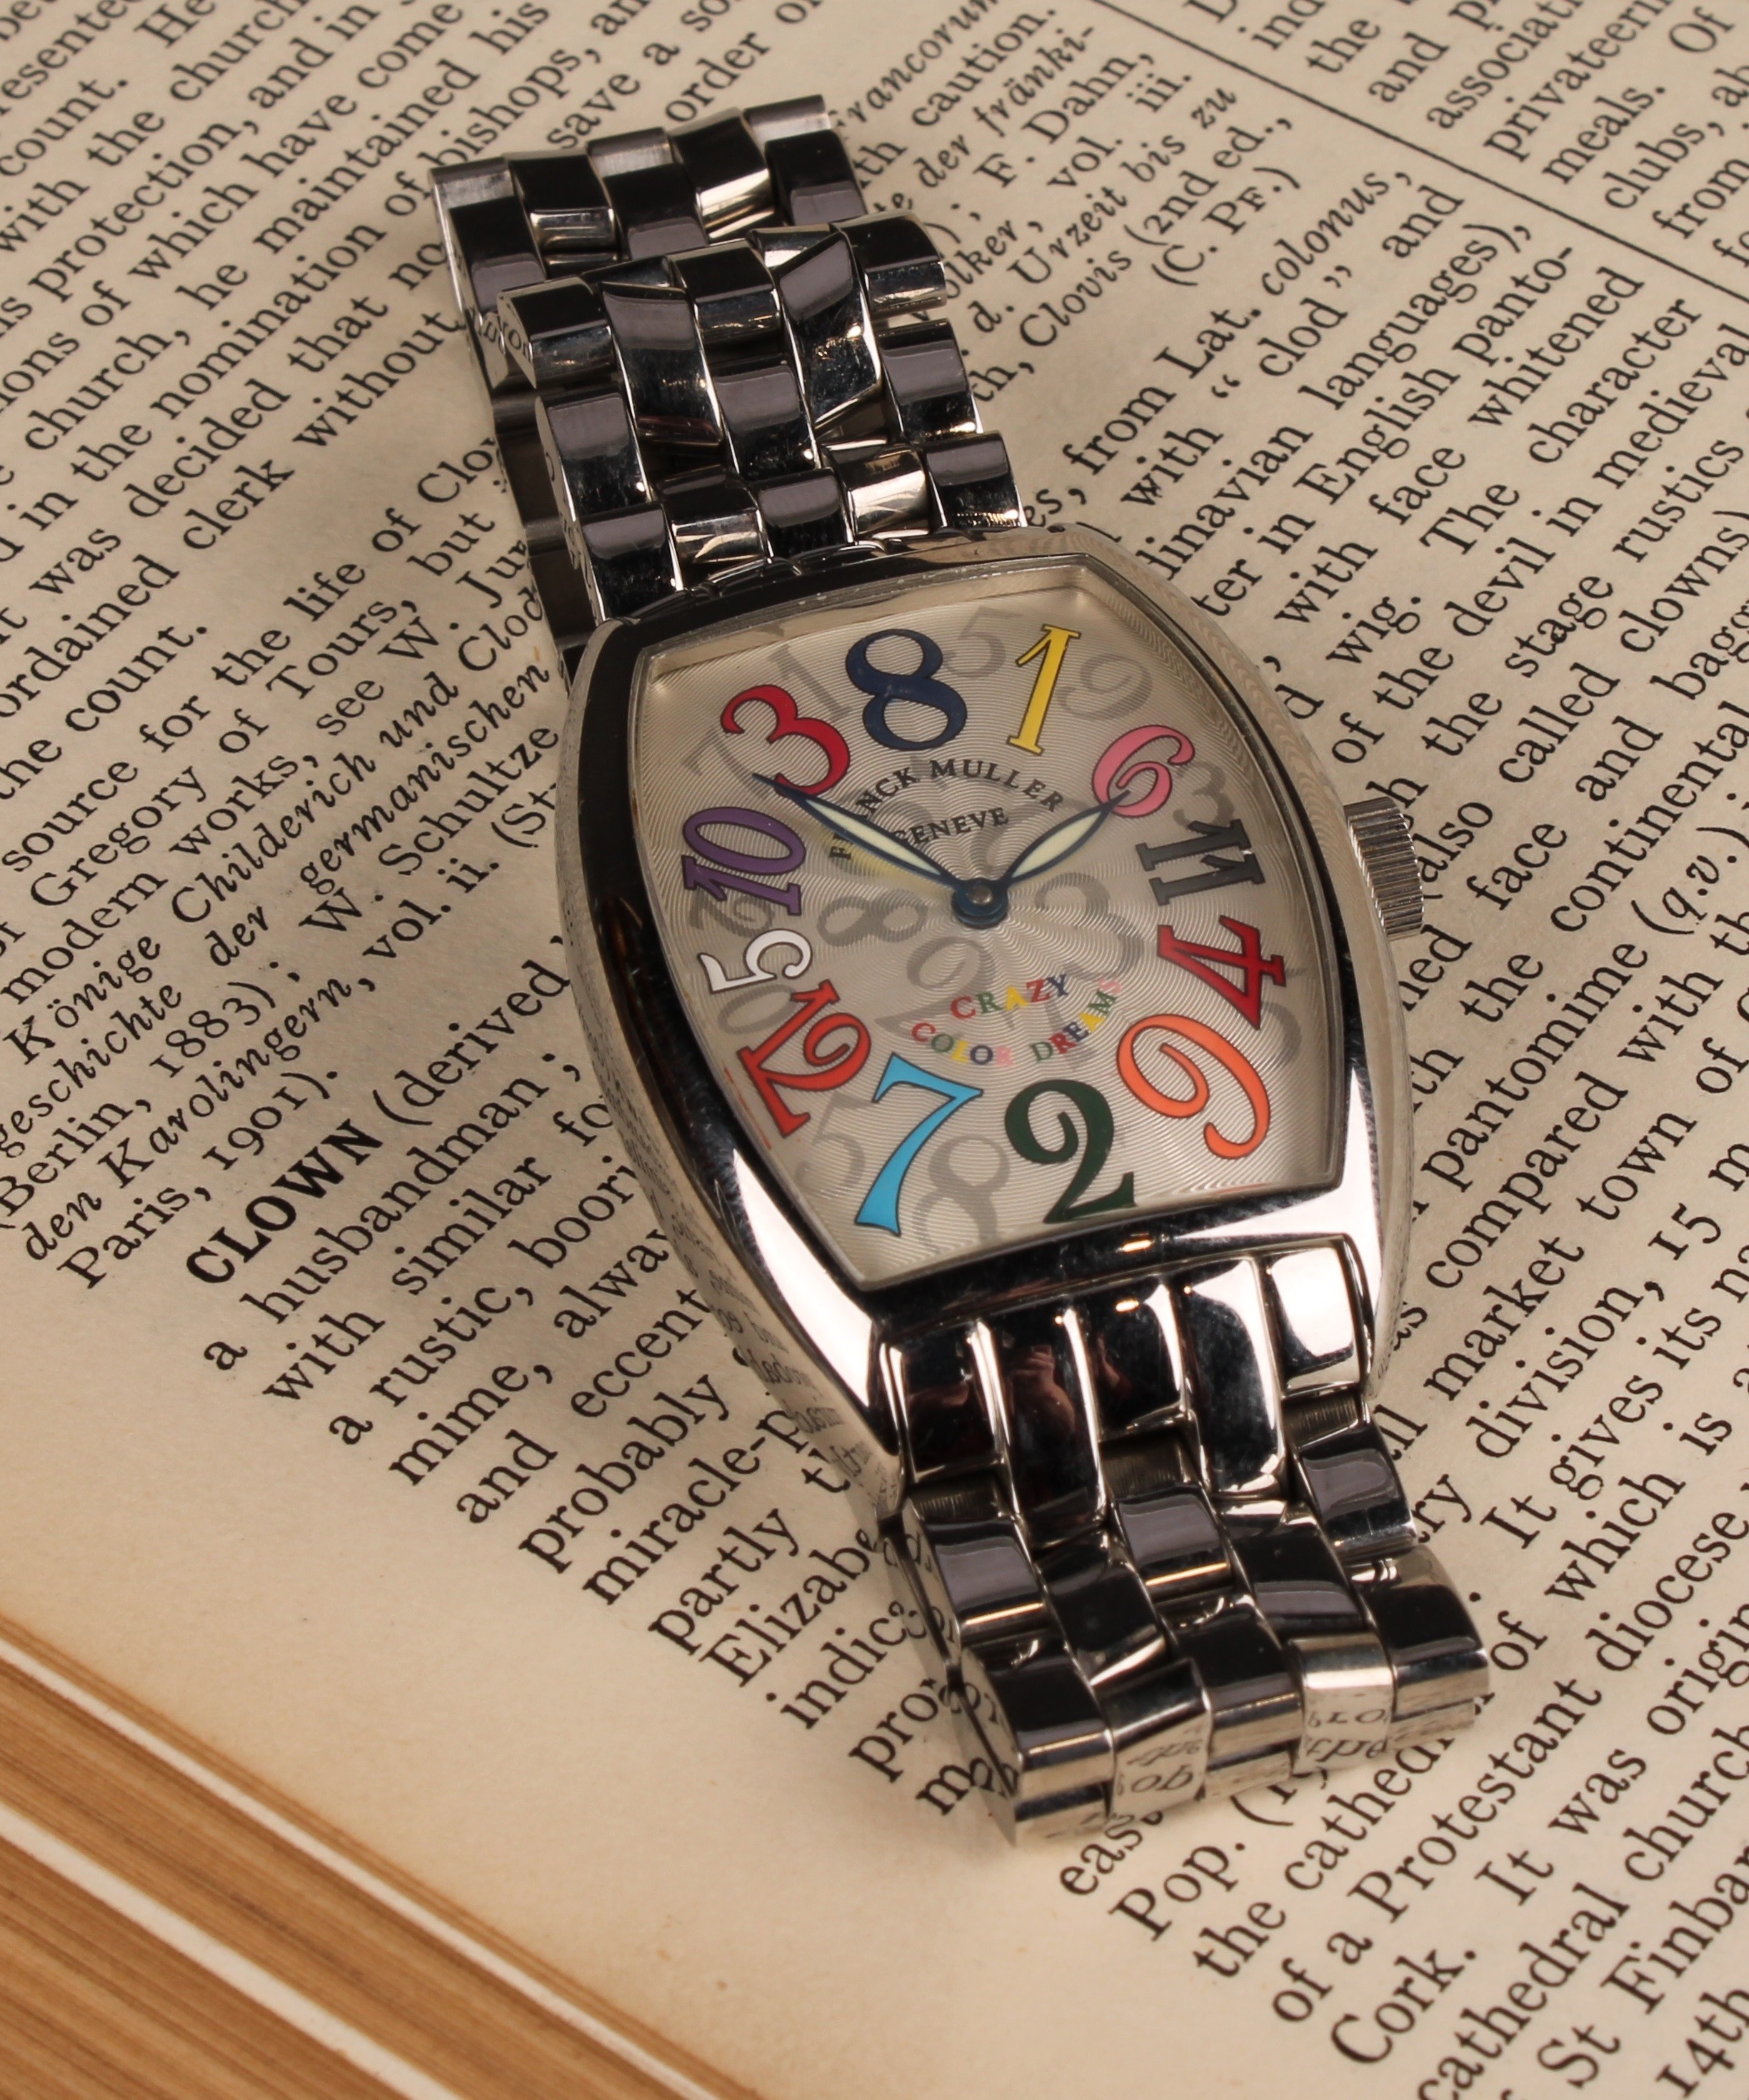 ***LOT WITHDRAWN ***A Franck Muller of Geneve stainless steel watch, Crazy Color Dreams (sic.),